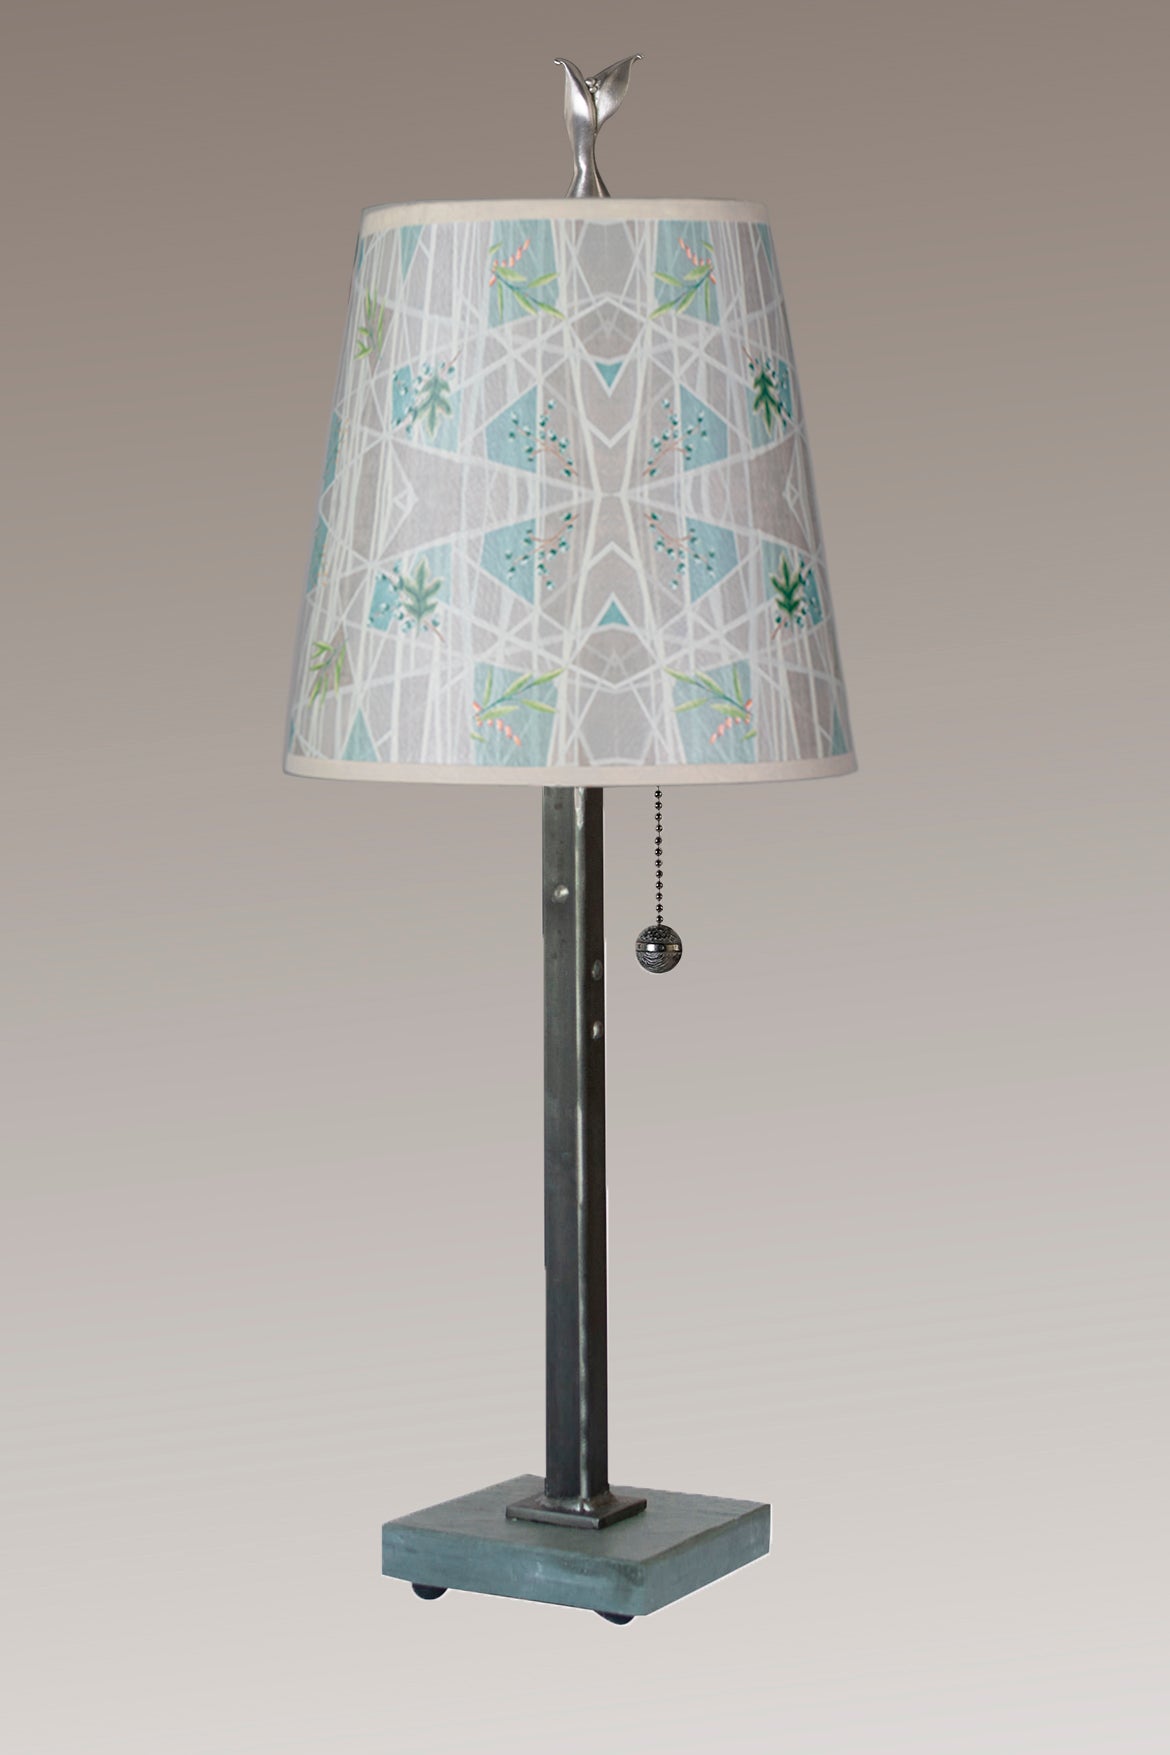 Janna Ugone &amp; Co Table Lamps Steel Table Lamp with Small Drum Shade in Prism